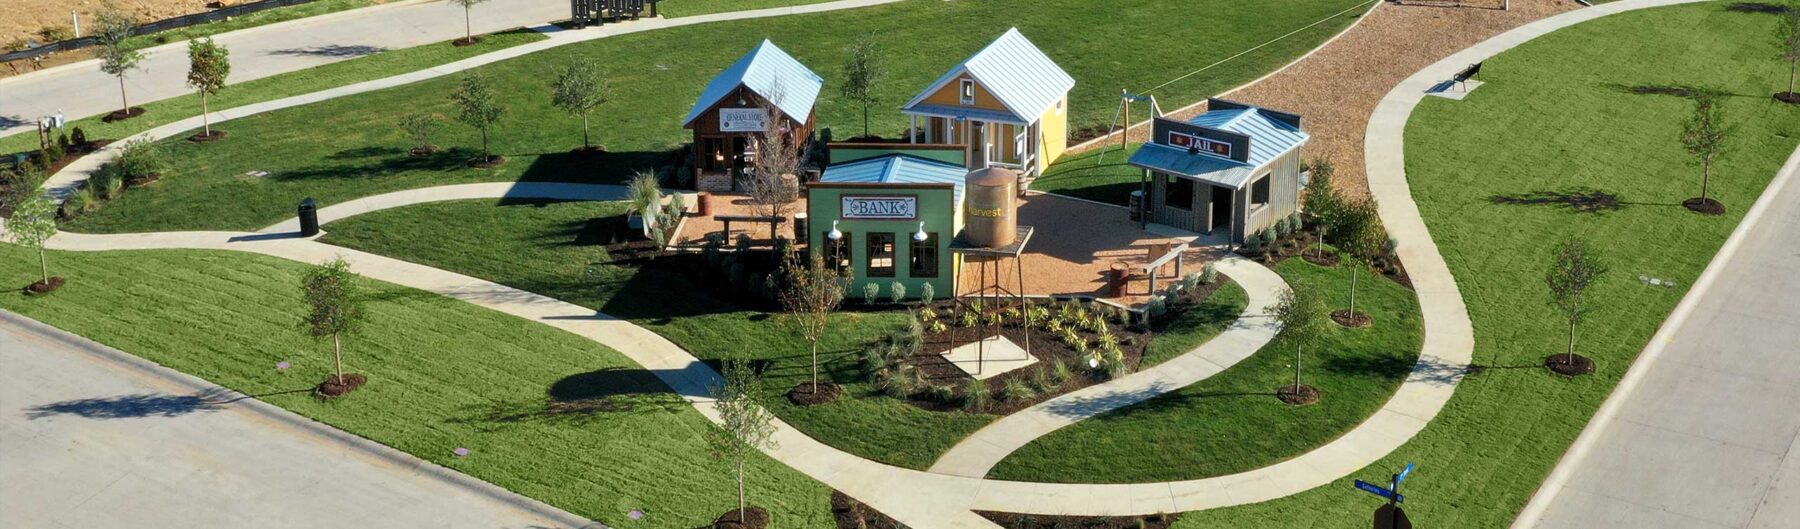 A playground in a Hillwood community